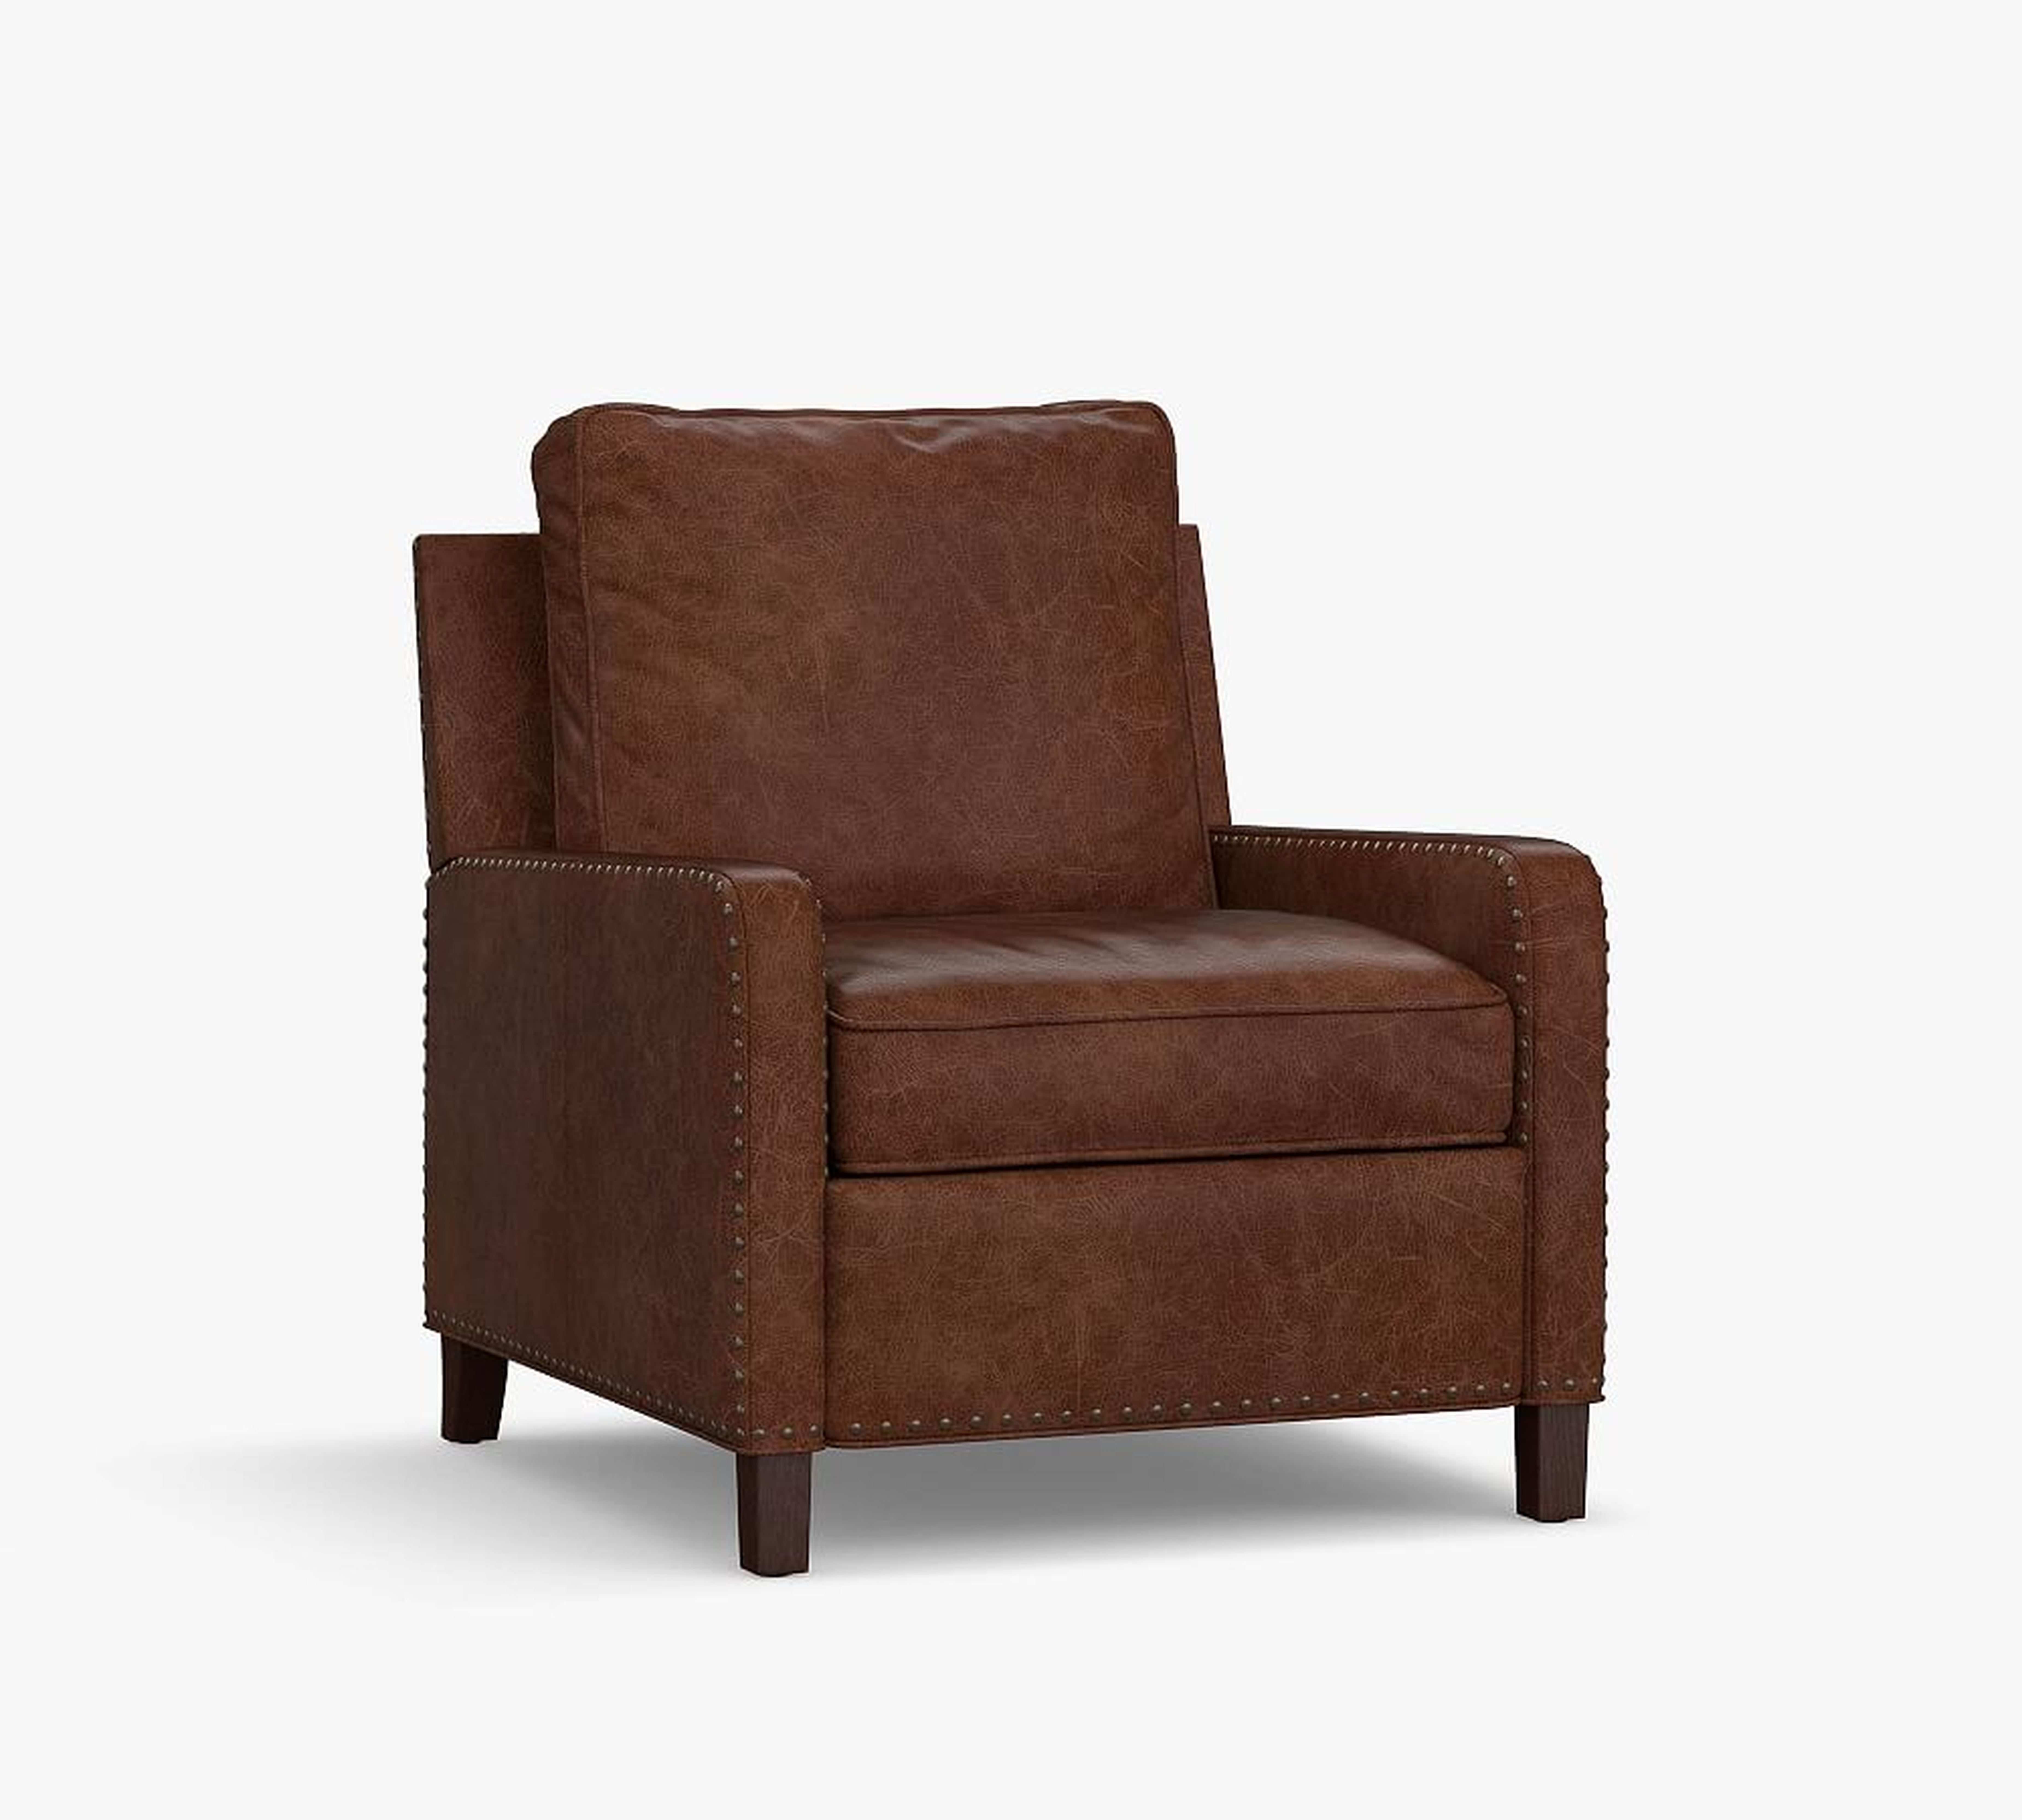 Tyler Curved Leather Recliner with Bronze Nailheads, Down Blend Wrapped Cushions, Burnished Bourbon - Pottery Barn